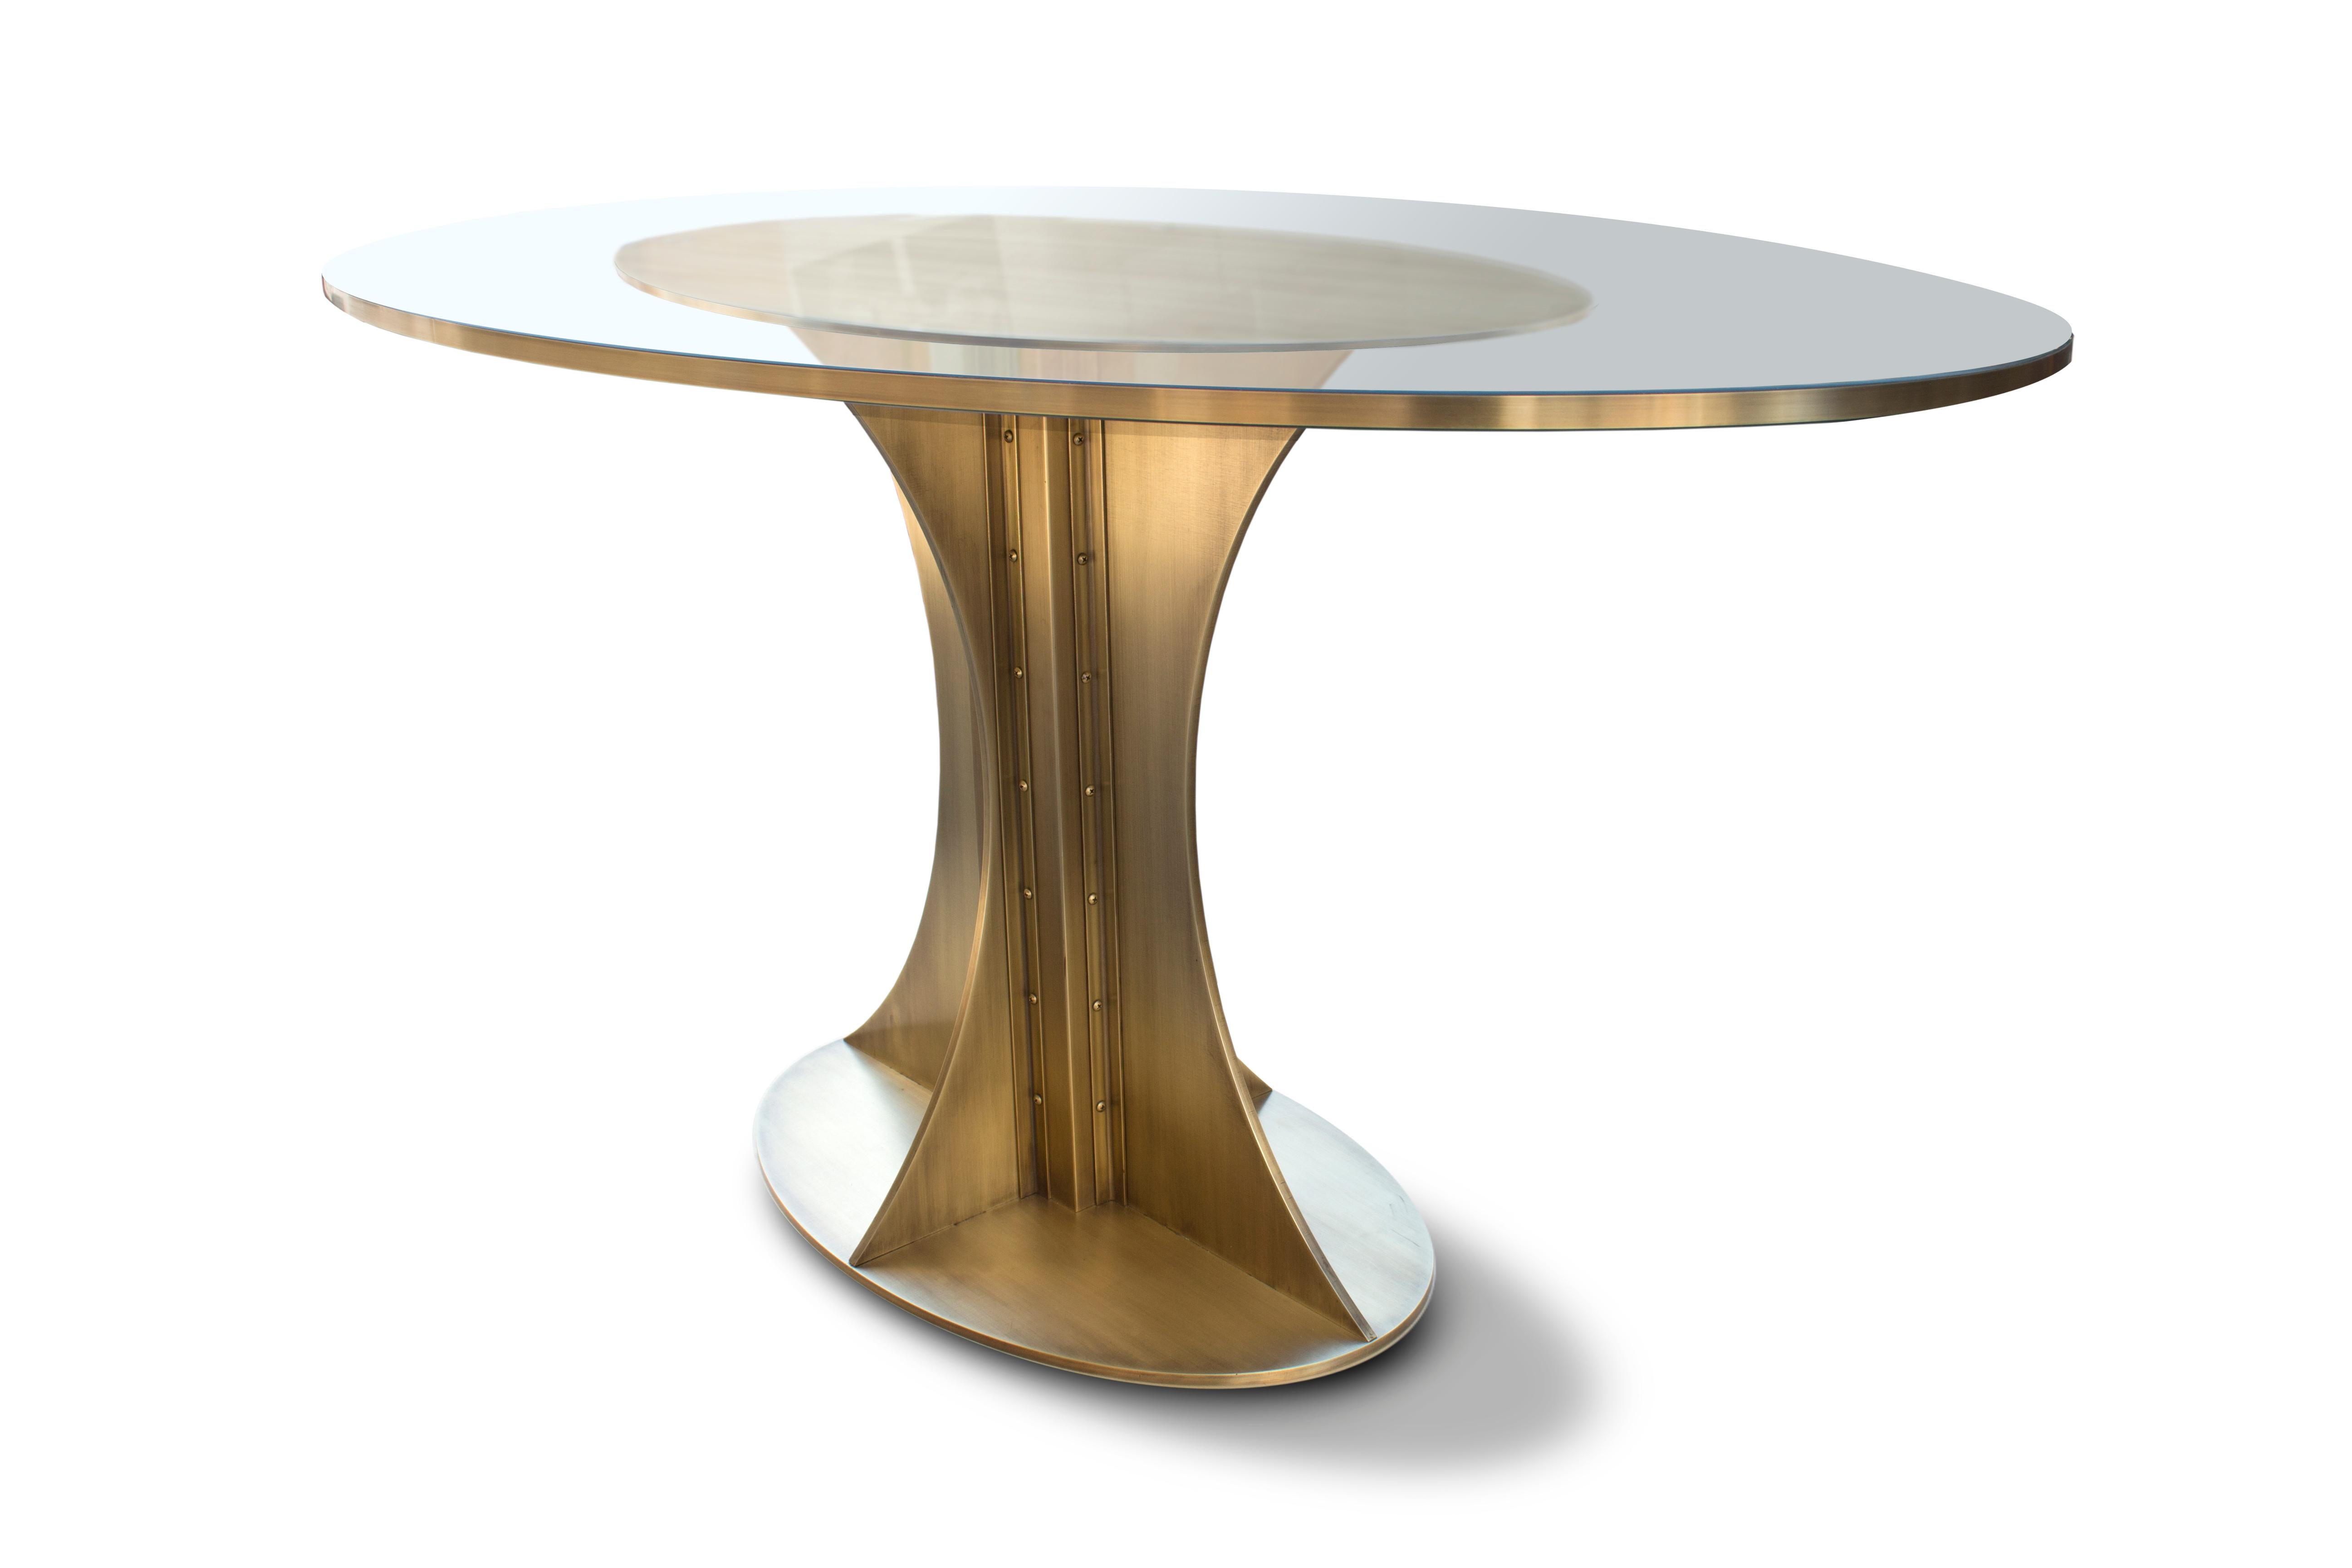 The Empire pedestal table is a powerful addition to the Mark Jupiter Elegant Industrial Collection. The massive solid brass center pedestal is inspired by the Spire Cap of the Empire State Building; this exquisite brass banded table will not only be